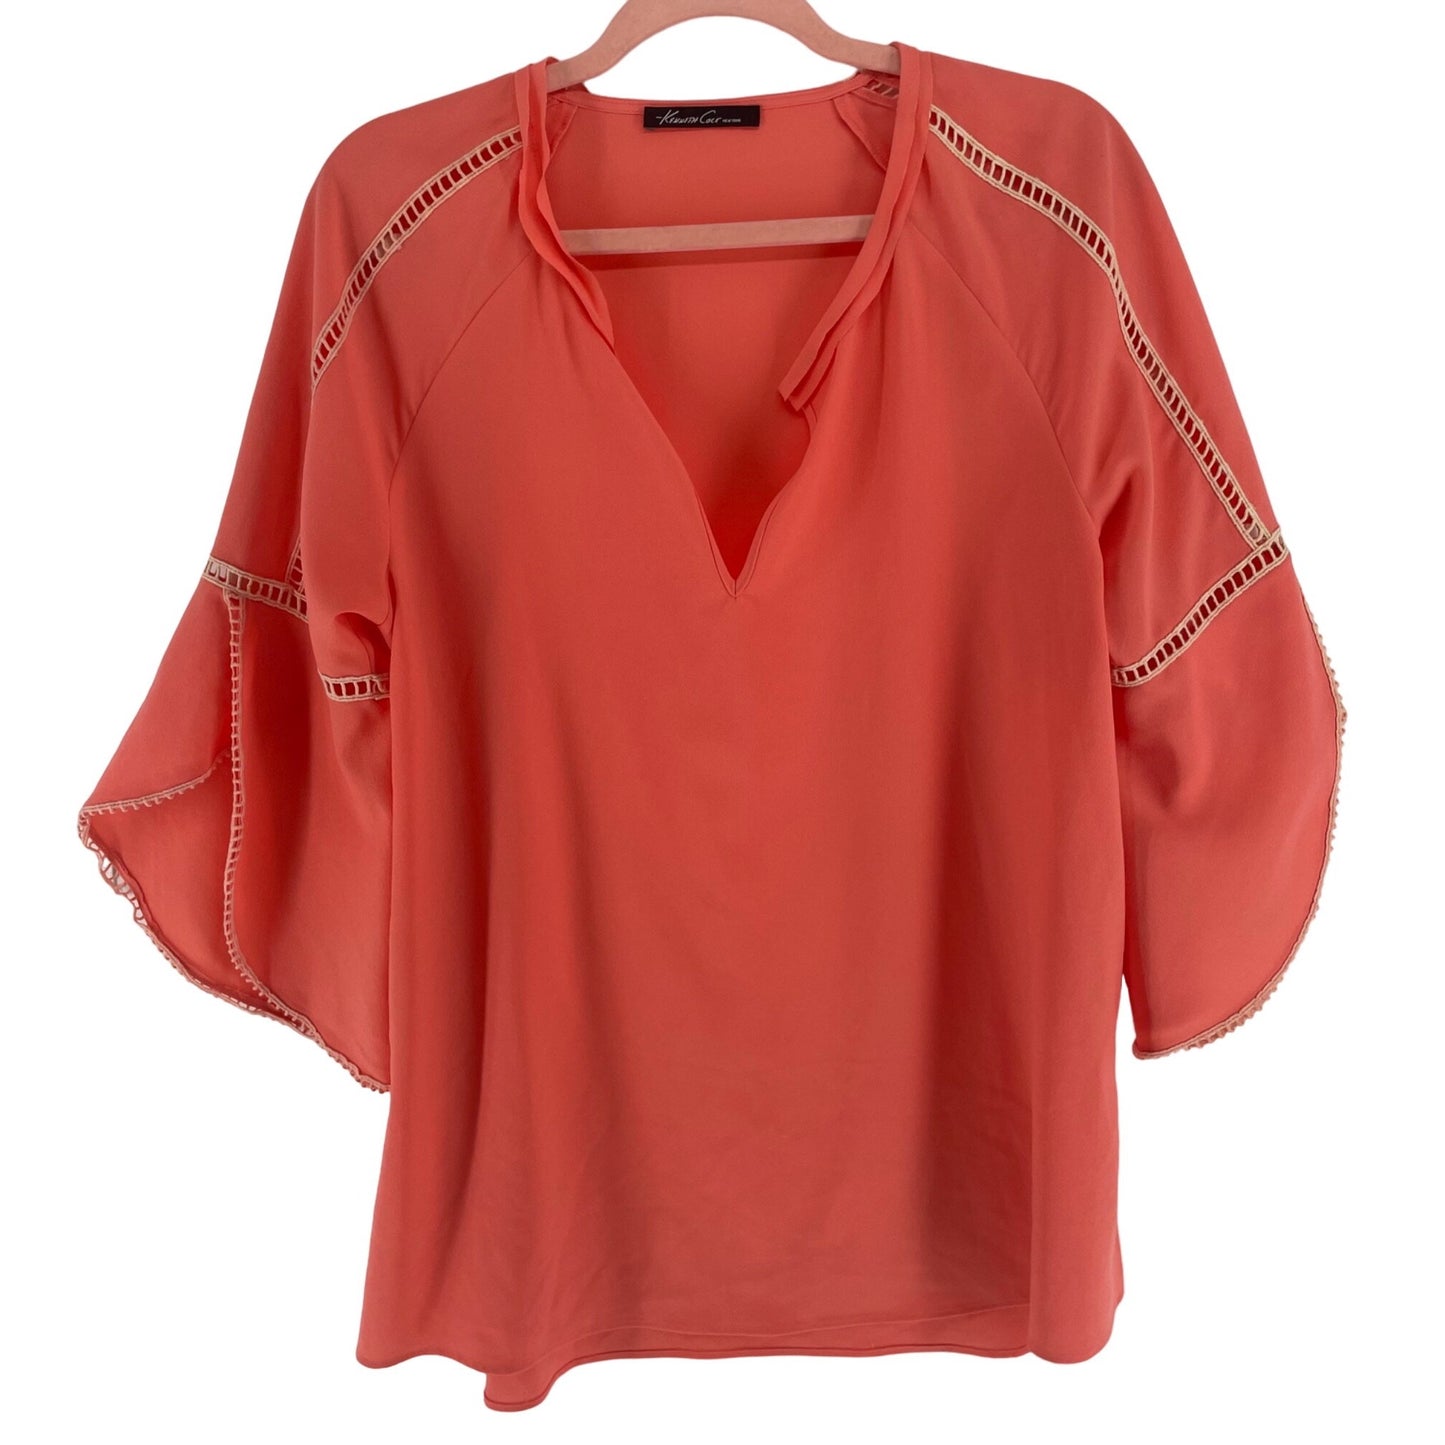 Kenneth Cole Women's Size XL Coral & Cream Bell Sleeve Blouse